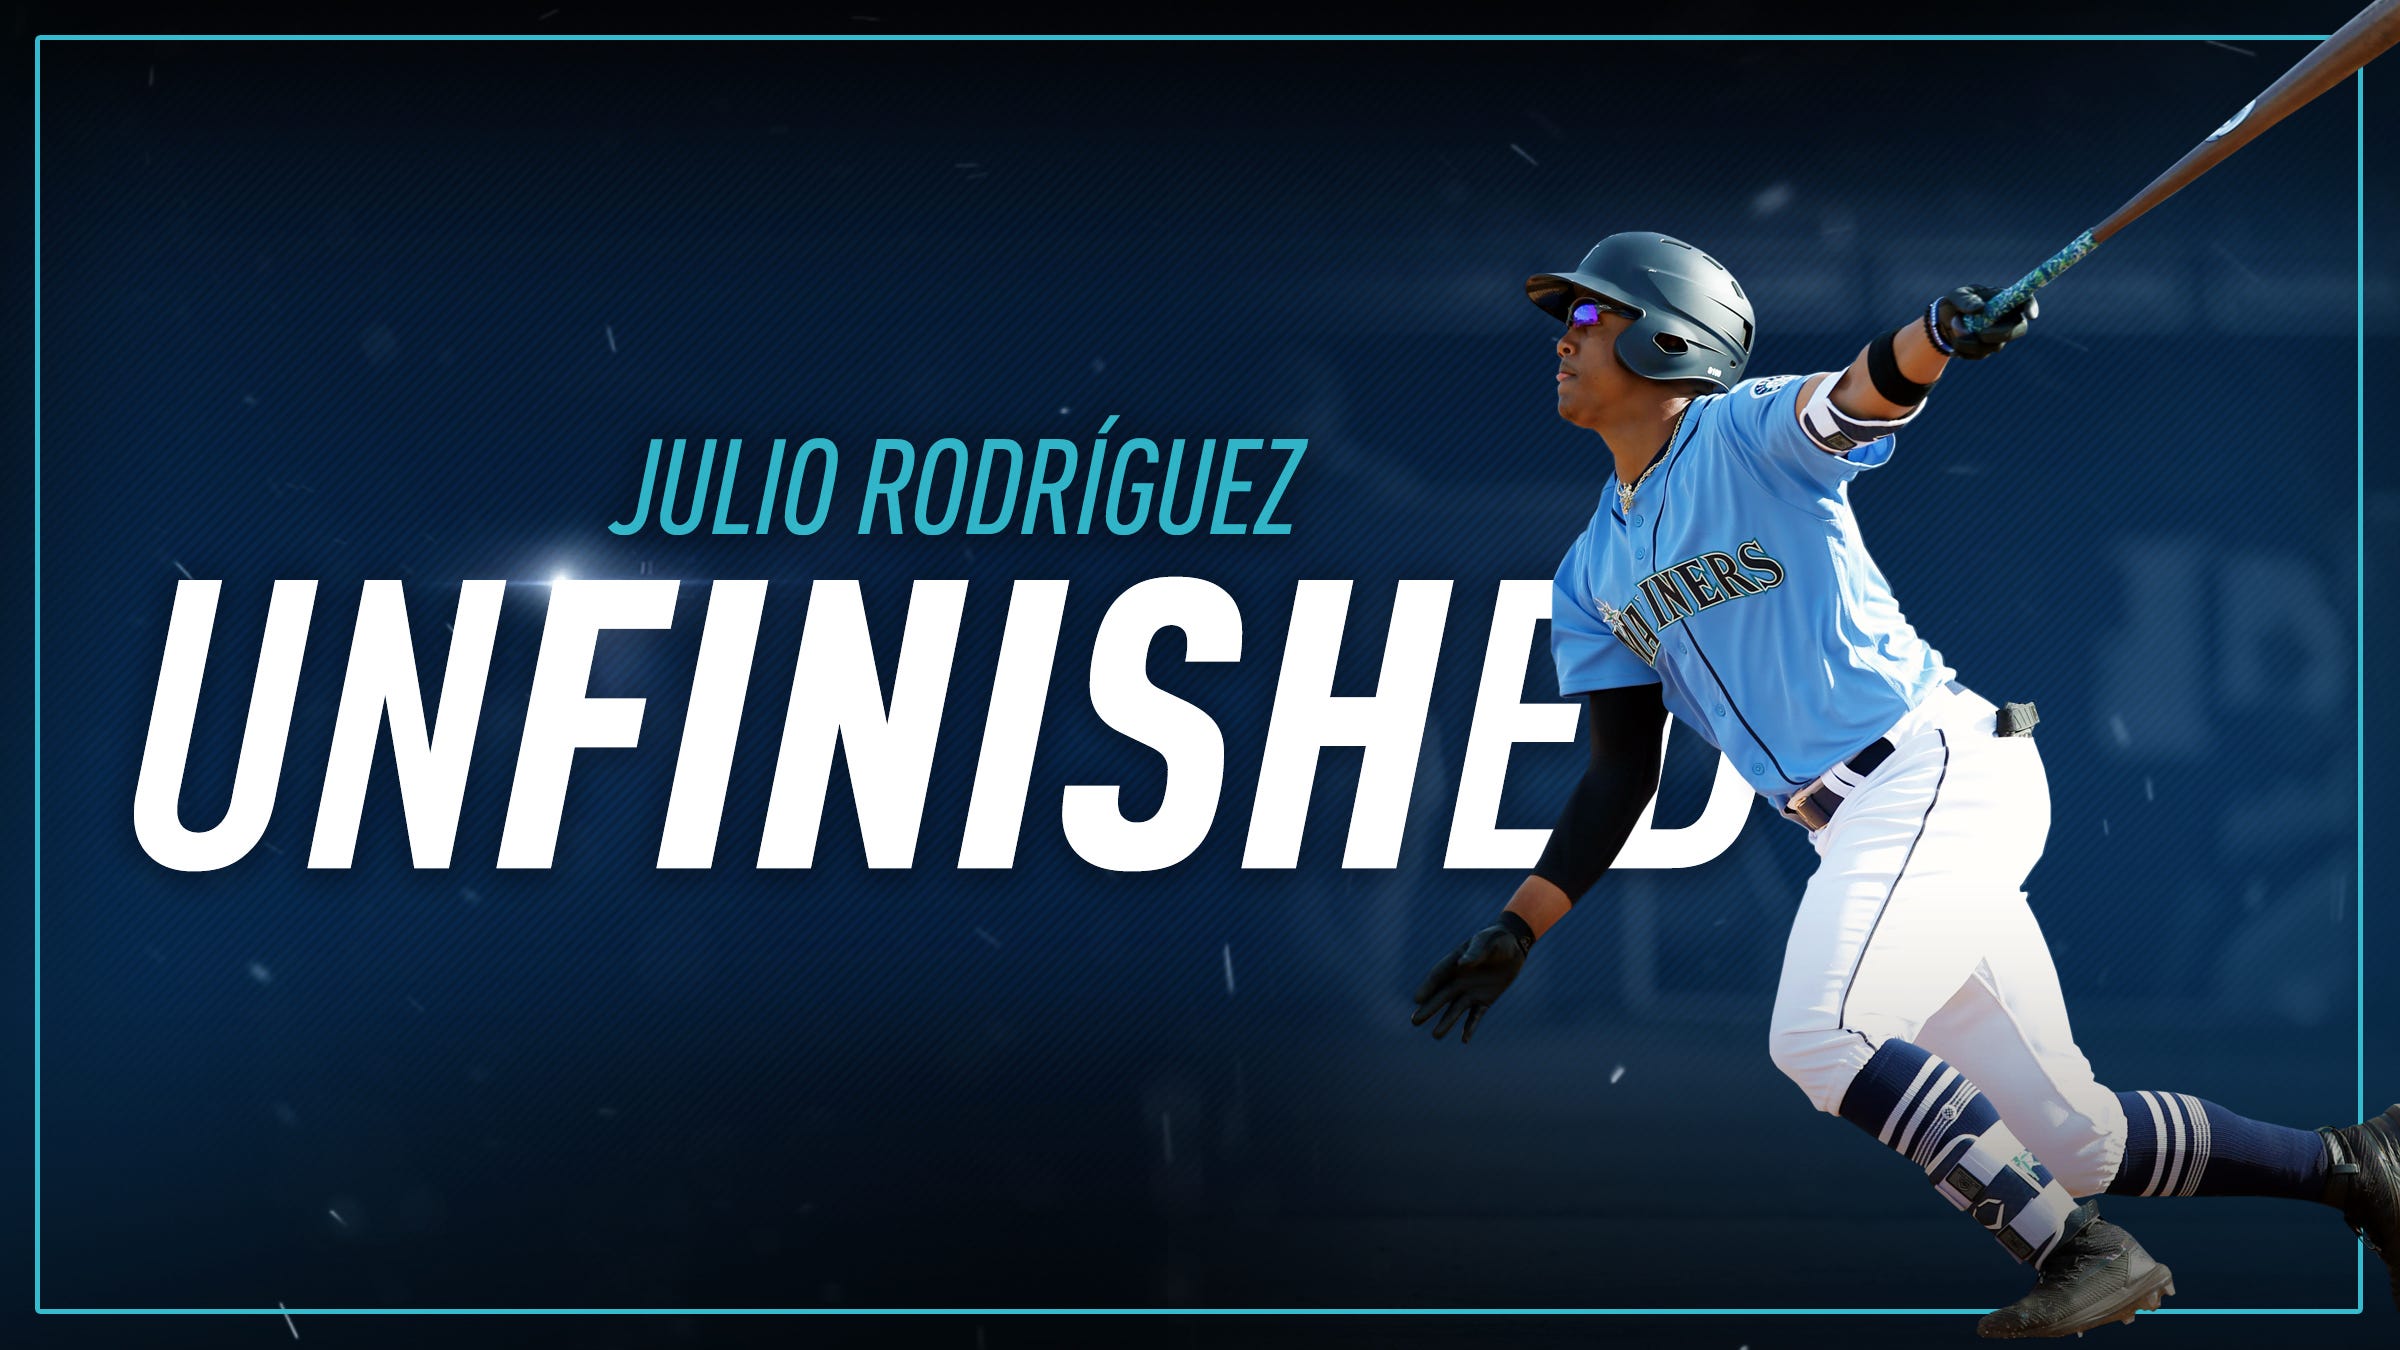 Julio Rodríguez is one of the game's best prospects—and it's clear